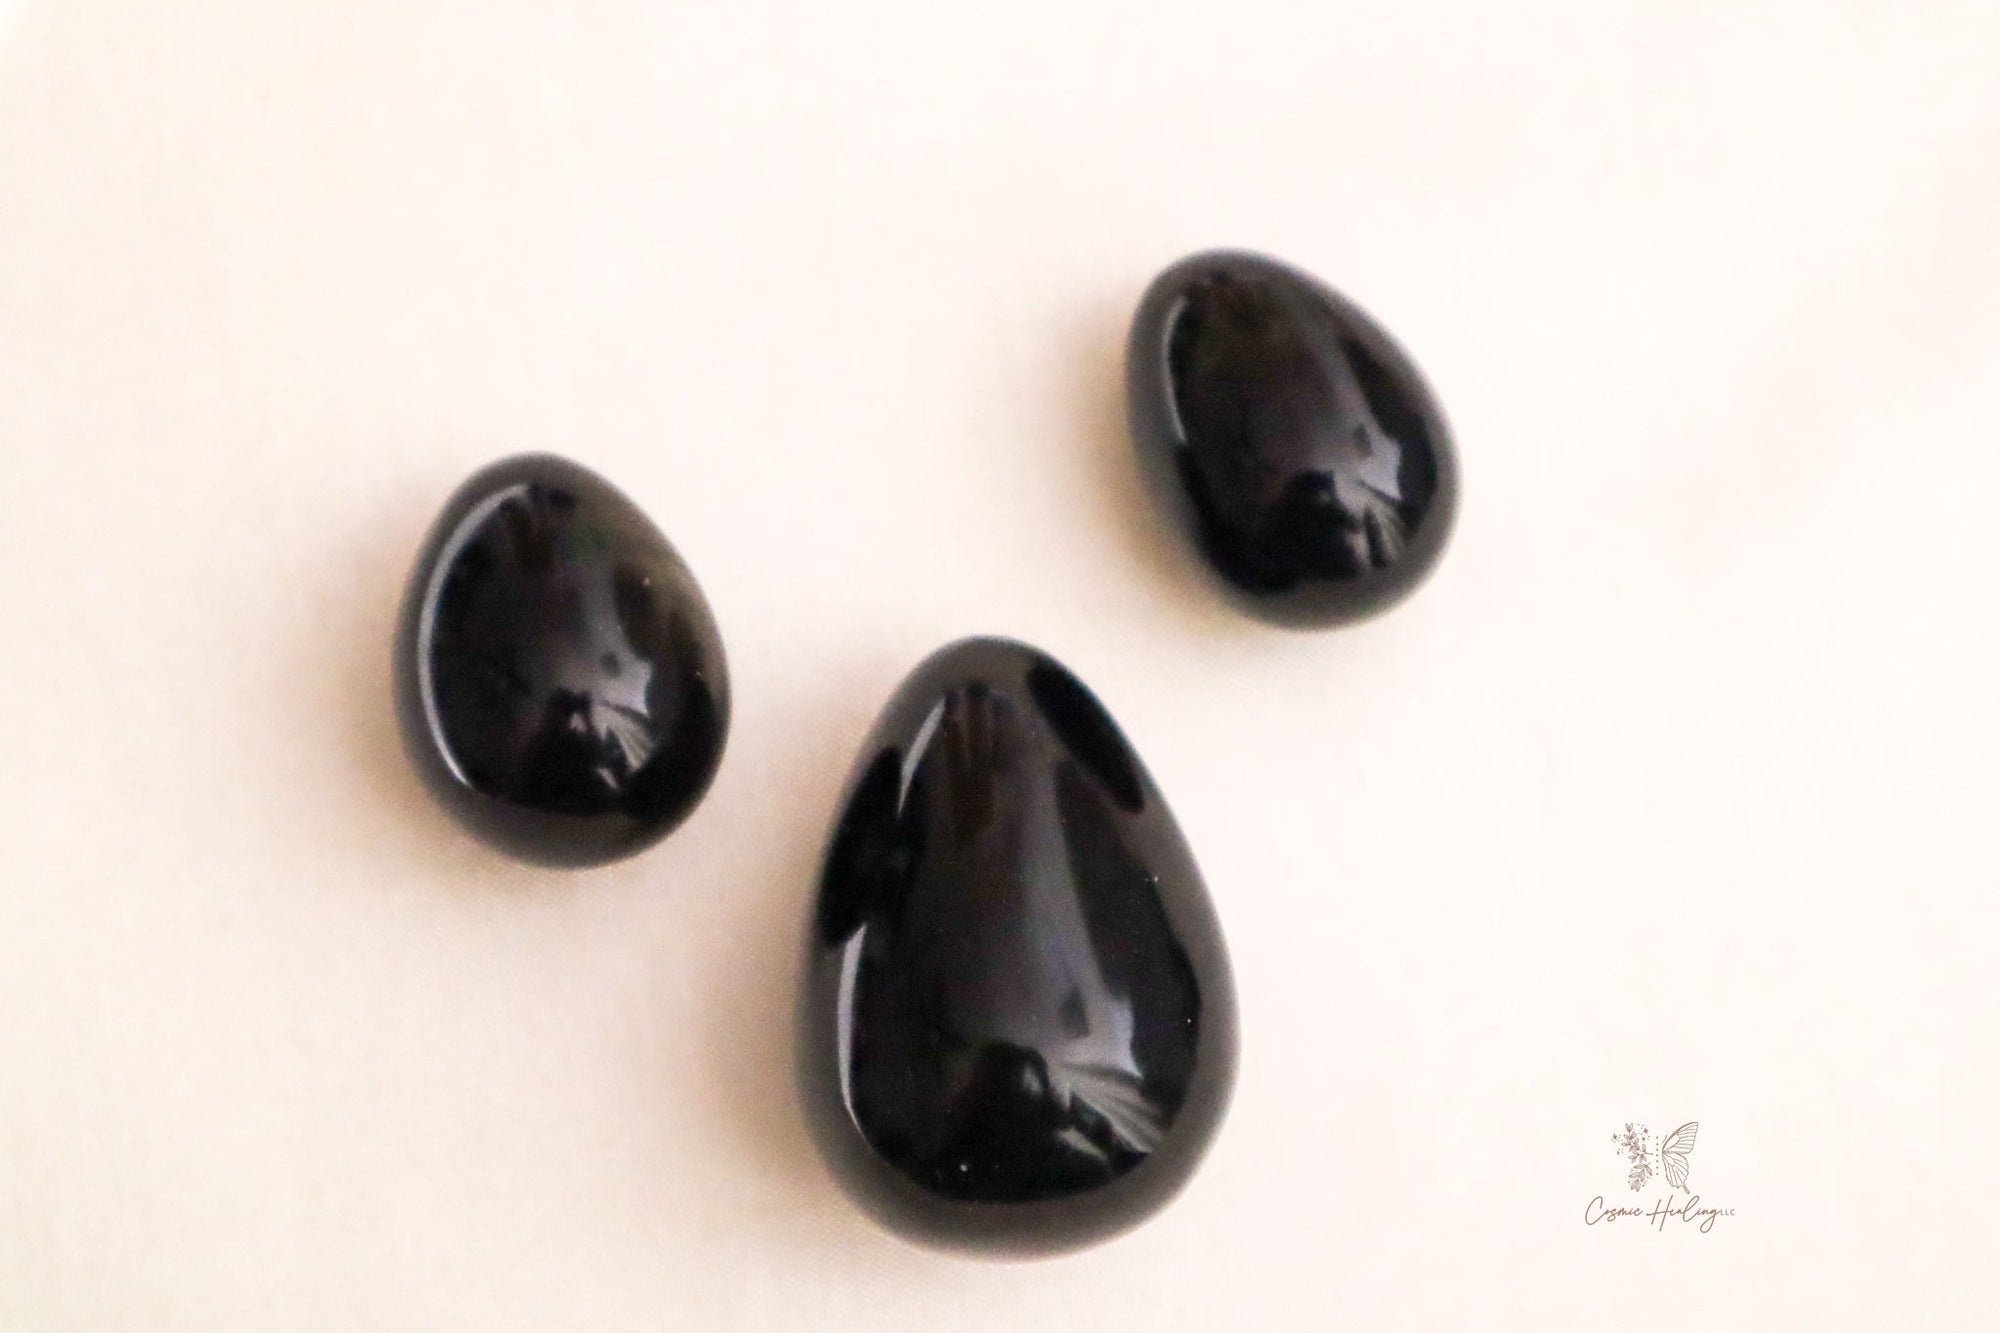 Obsidian Undrilled Yoni Egg - Shop Cosmic Healing